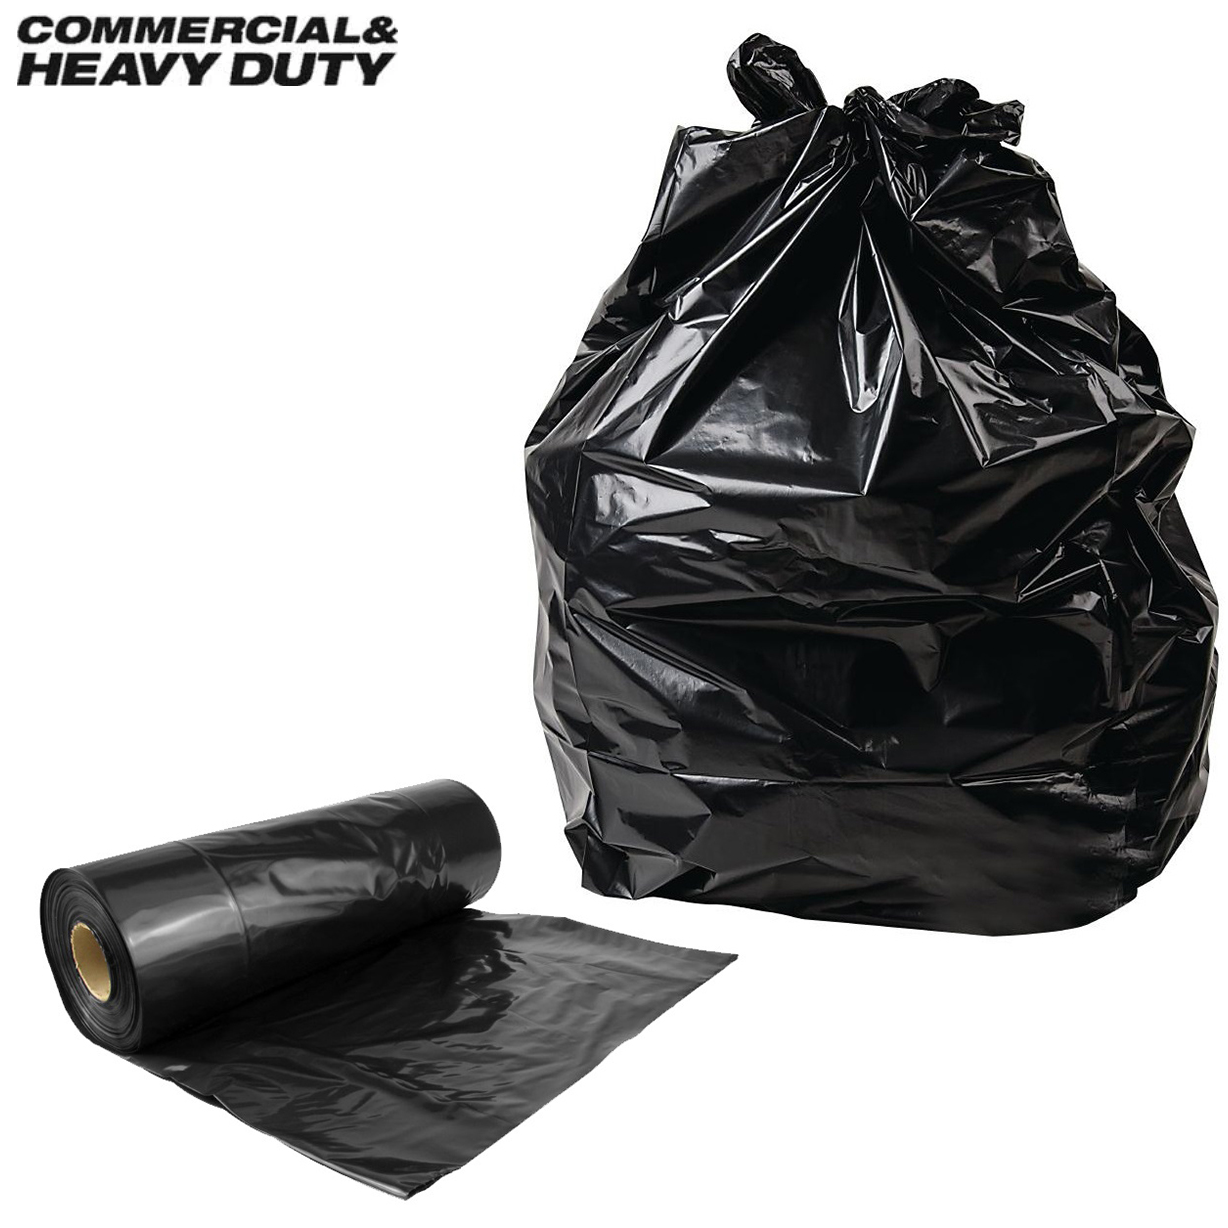 One-Year Supply of Extra Strong 50L Bin Liners Grab a bulk buy bargain with these commercial strong, heavy duty extra large refuse bags year Ultra Supply Stronger strong sack's sack Refuse One-Year one of Liners liner line large Heavy-Duty Heavy Extra Duty commercial buying Buy bundles bundle bulk black bins Bin Bag's bag and 50L